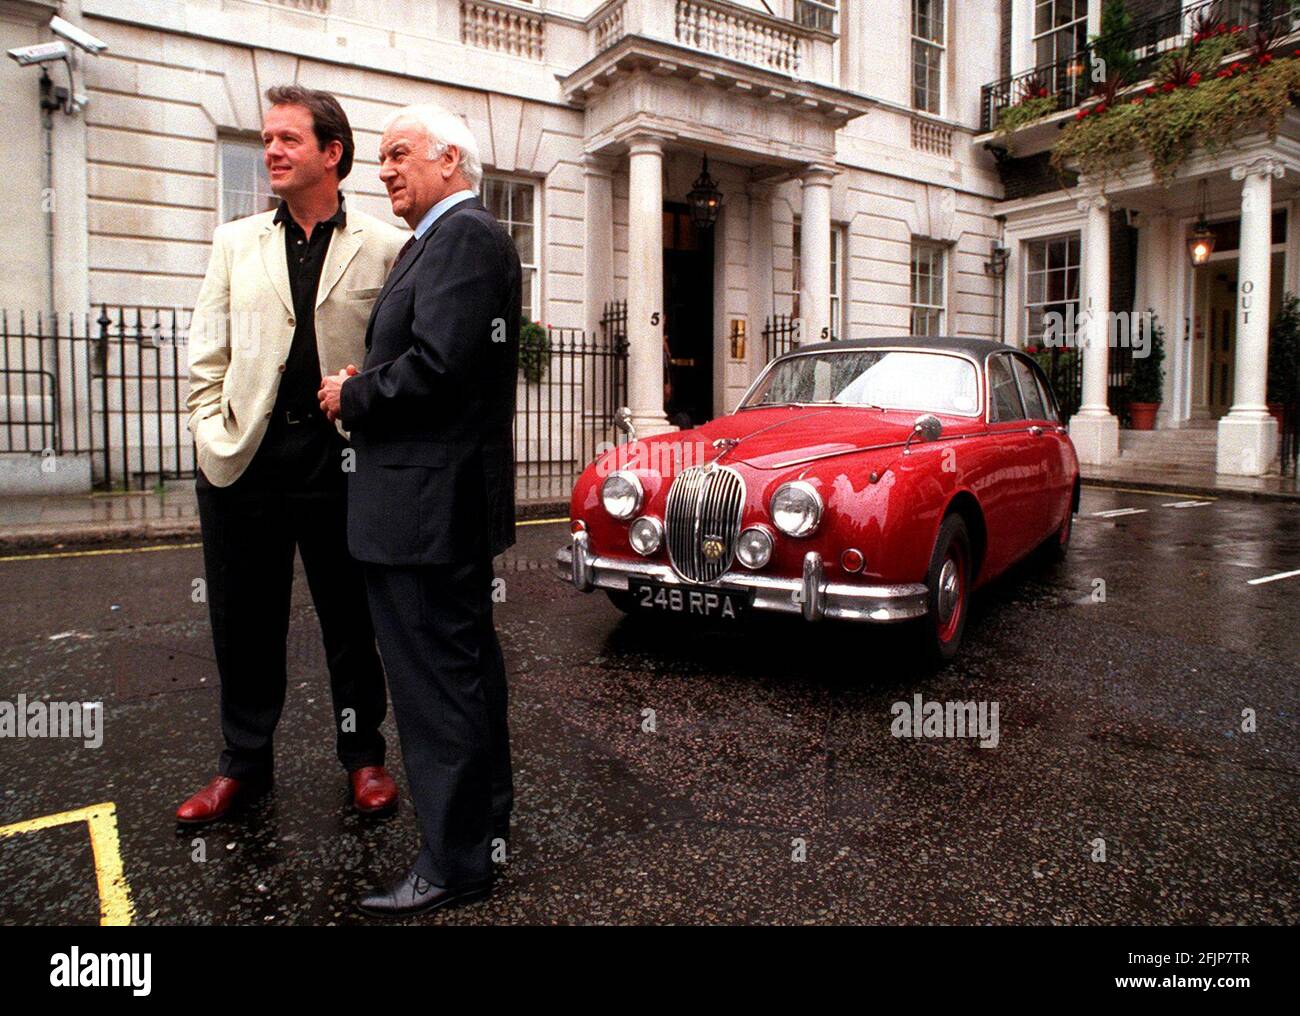 JOHN THAW AND KEVIN WHATELY OCTOBER 2000WERE IN LONDON TO PUBLICISE THE DRAMATIISATION OF COLIN DEXTER'S FINAL NOVEL THE REMORSEFUL DAY, AND WILL BE THE 33RD INSPECTOR MORSE FILM. IT WILL APPEAR ON TELEVISION LATER THIS AUTUMN. ALSO ON HAND WAS INSPCTOR MORSE'S JAGUAR Stock Photo